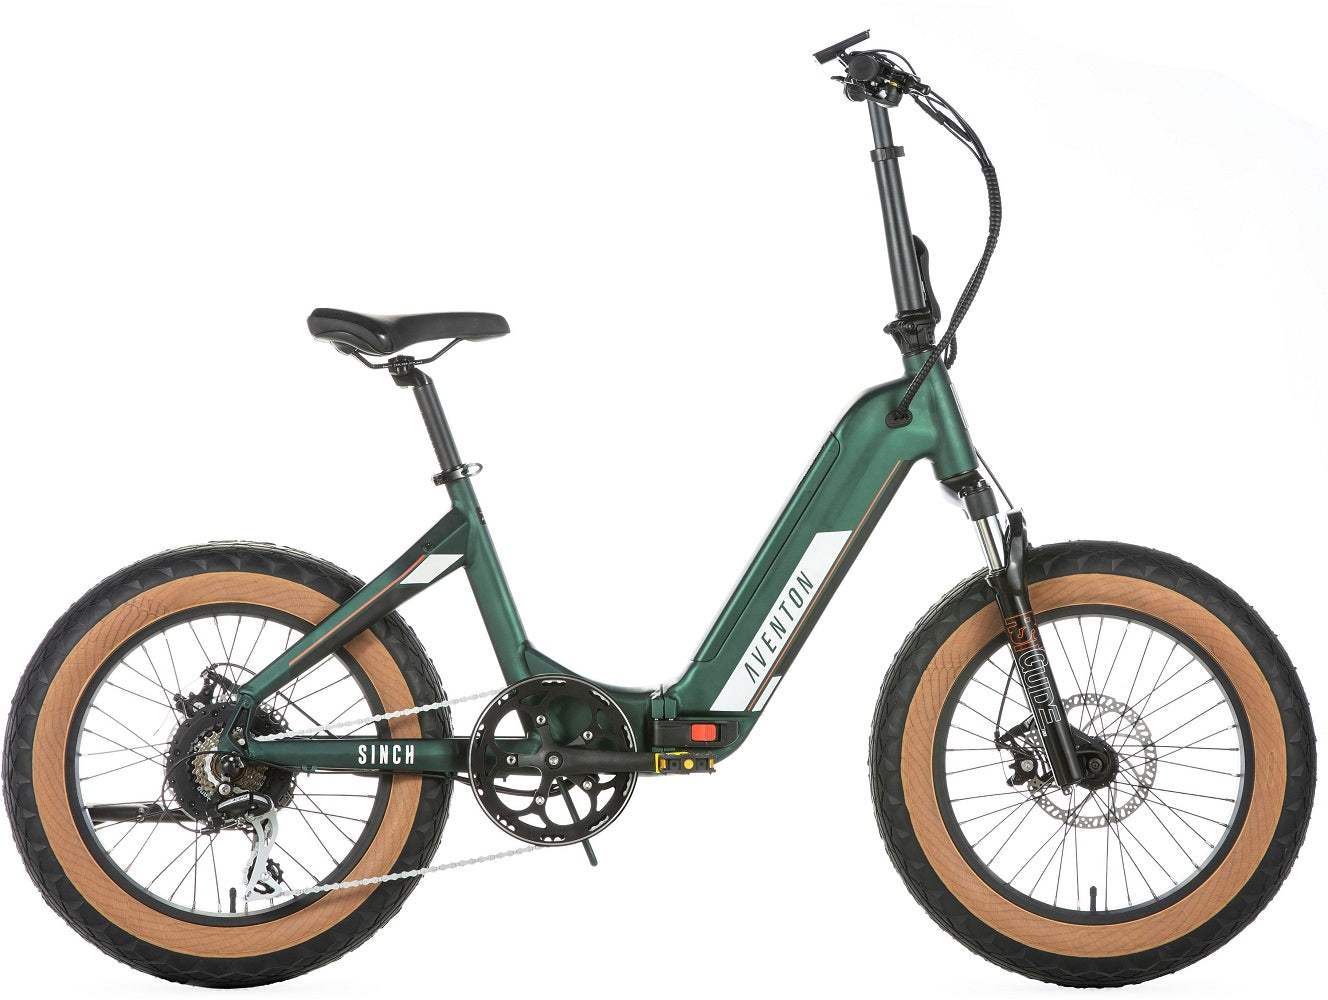 Aventon Sinch Step-Through Foldable Ebike w/ 40 mile Max Range - Moss Green (Pre-Owned)